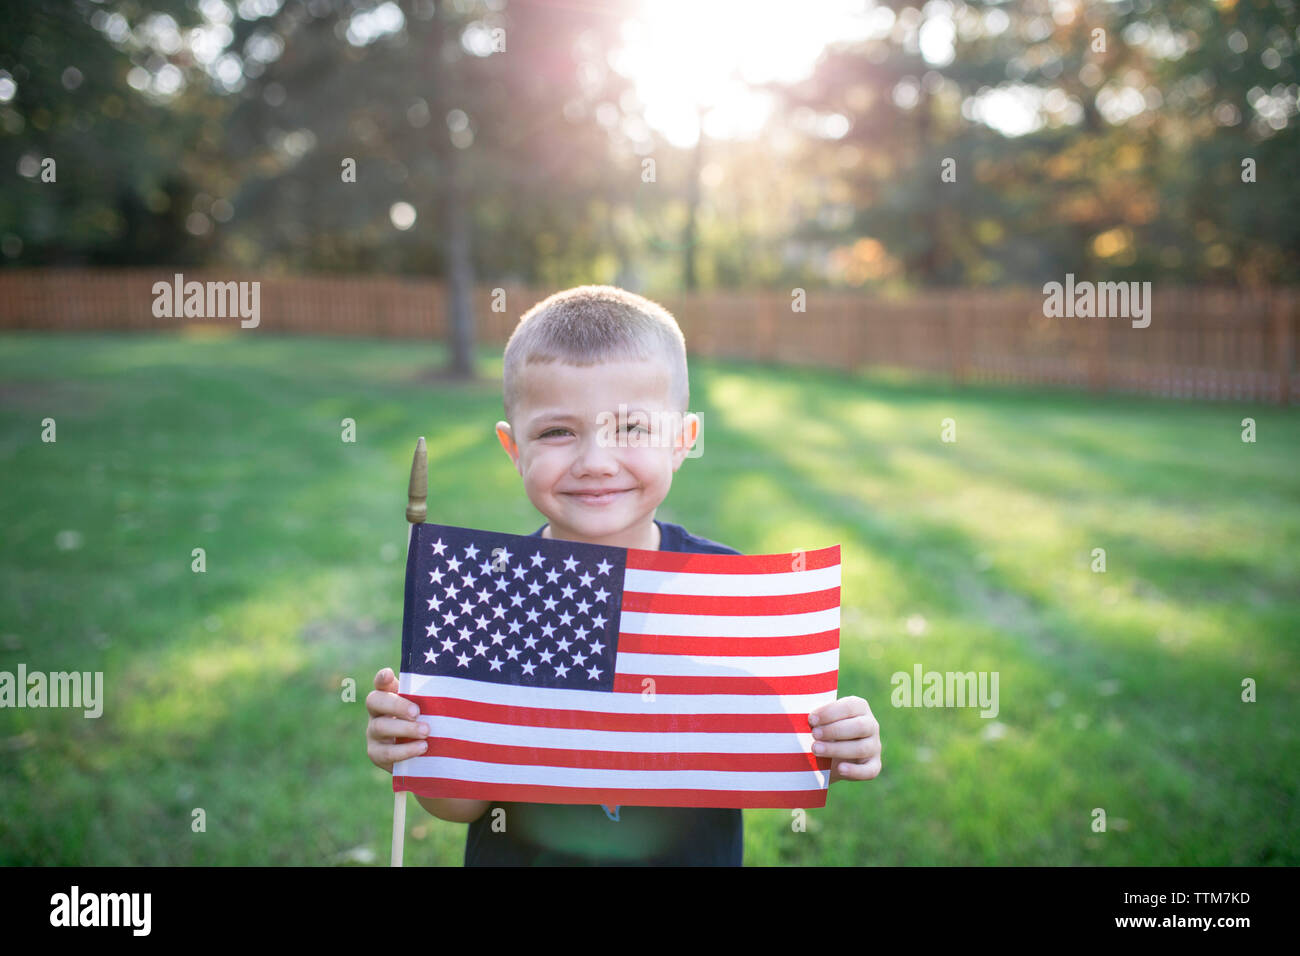 Portrait of smiling boy holding American flag while standing on field in yard Stock Photo